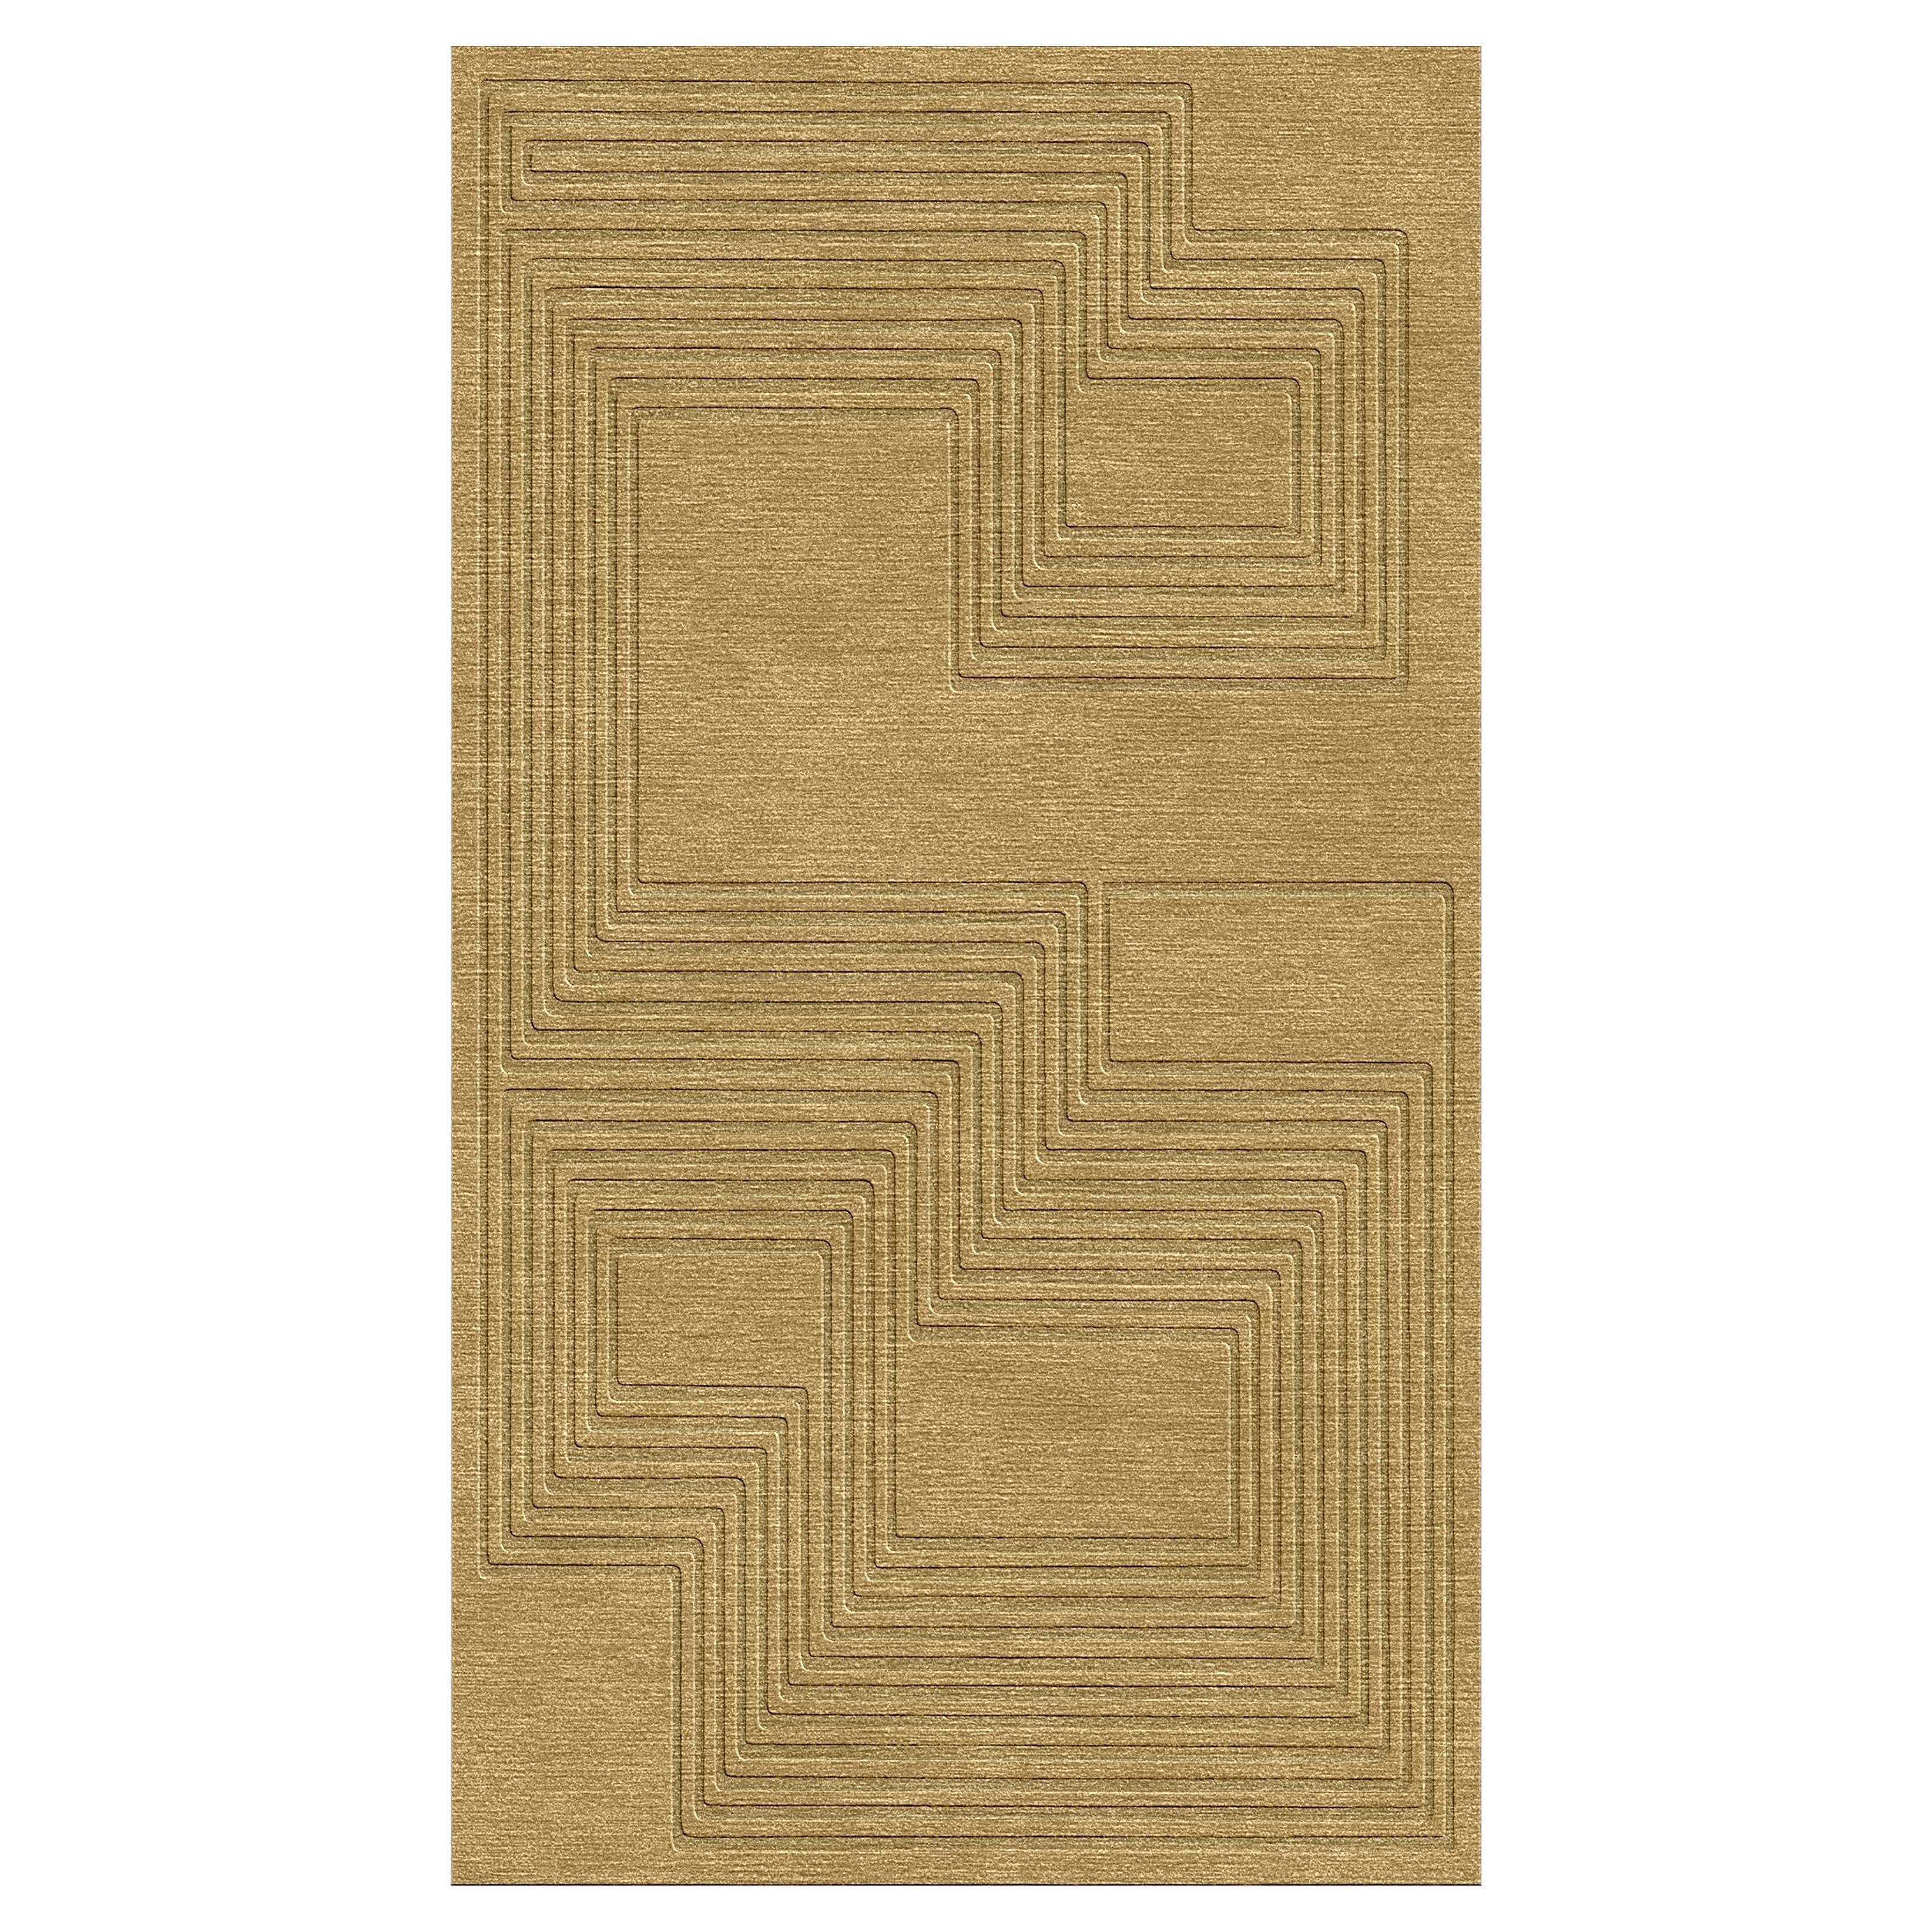 Maze Relief Rug, Jt. Pfeiffer, Represented by Tuleste Factory For Sale